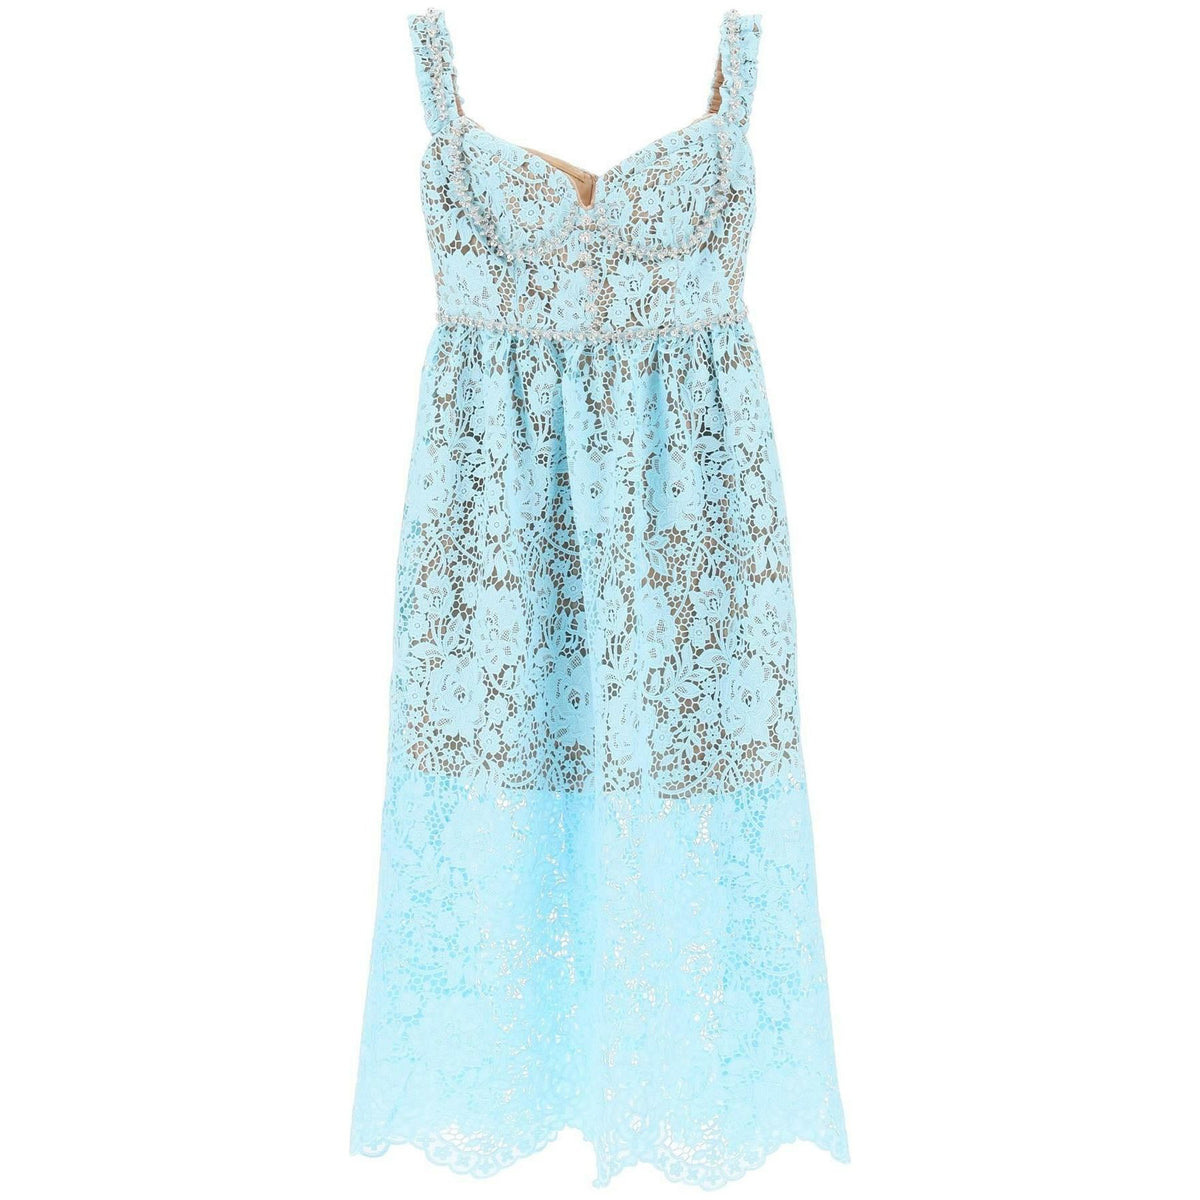 SELF PORTRAIT - Midi Dress In Floral Lace With Crystals - JOHN JULIA